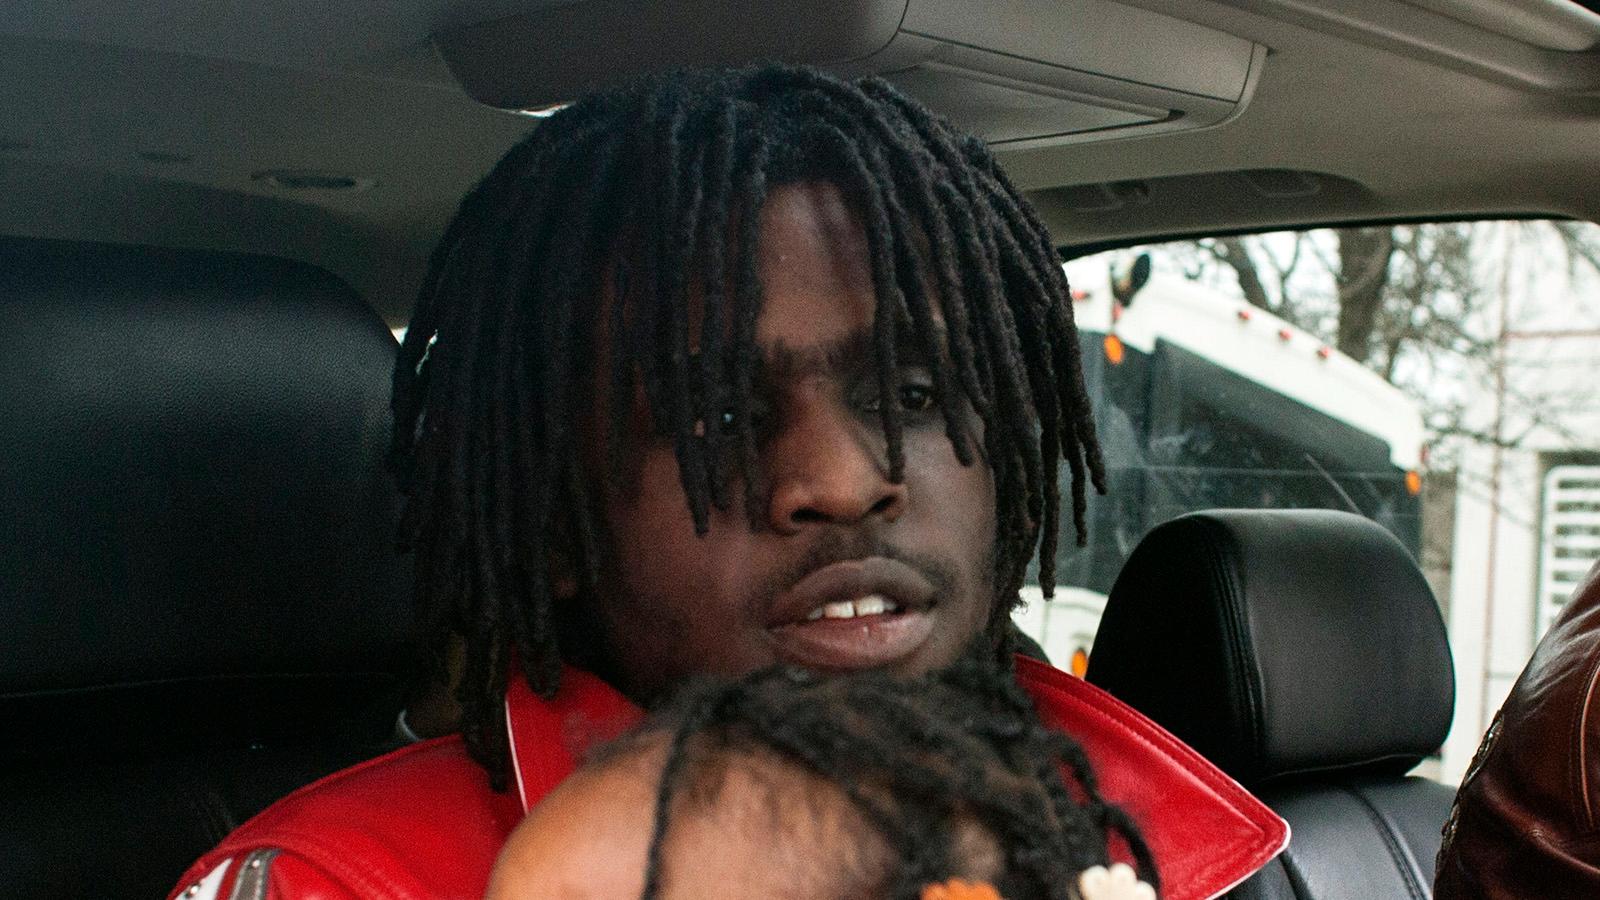 Chief Keef.